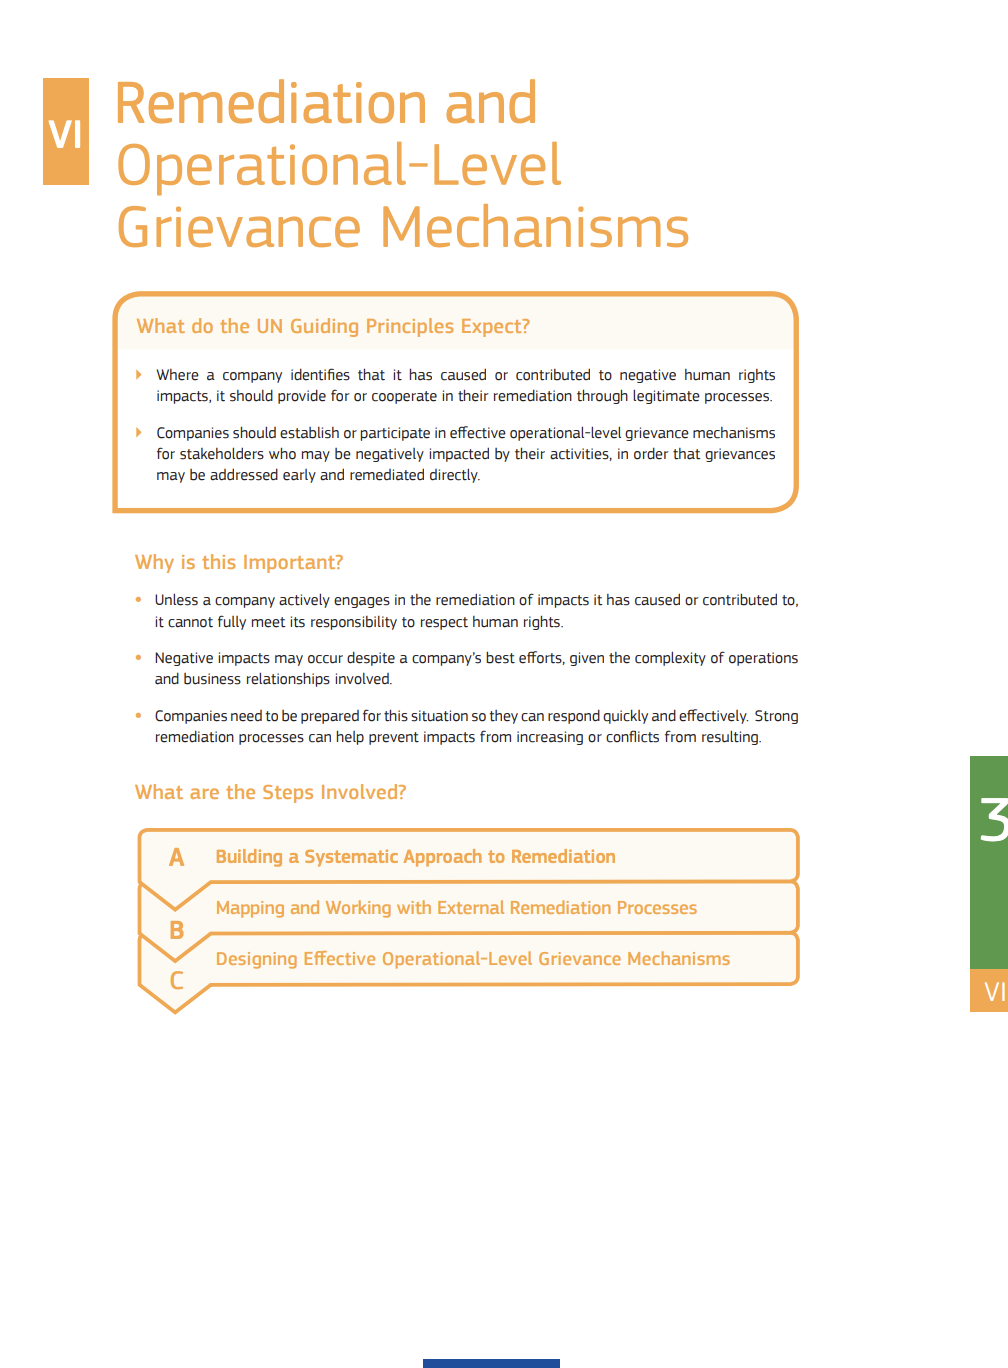 Remediation and Operational-Level Grievance Mechanisms